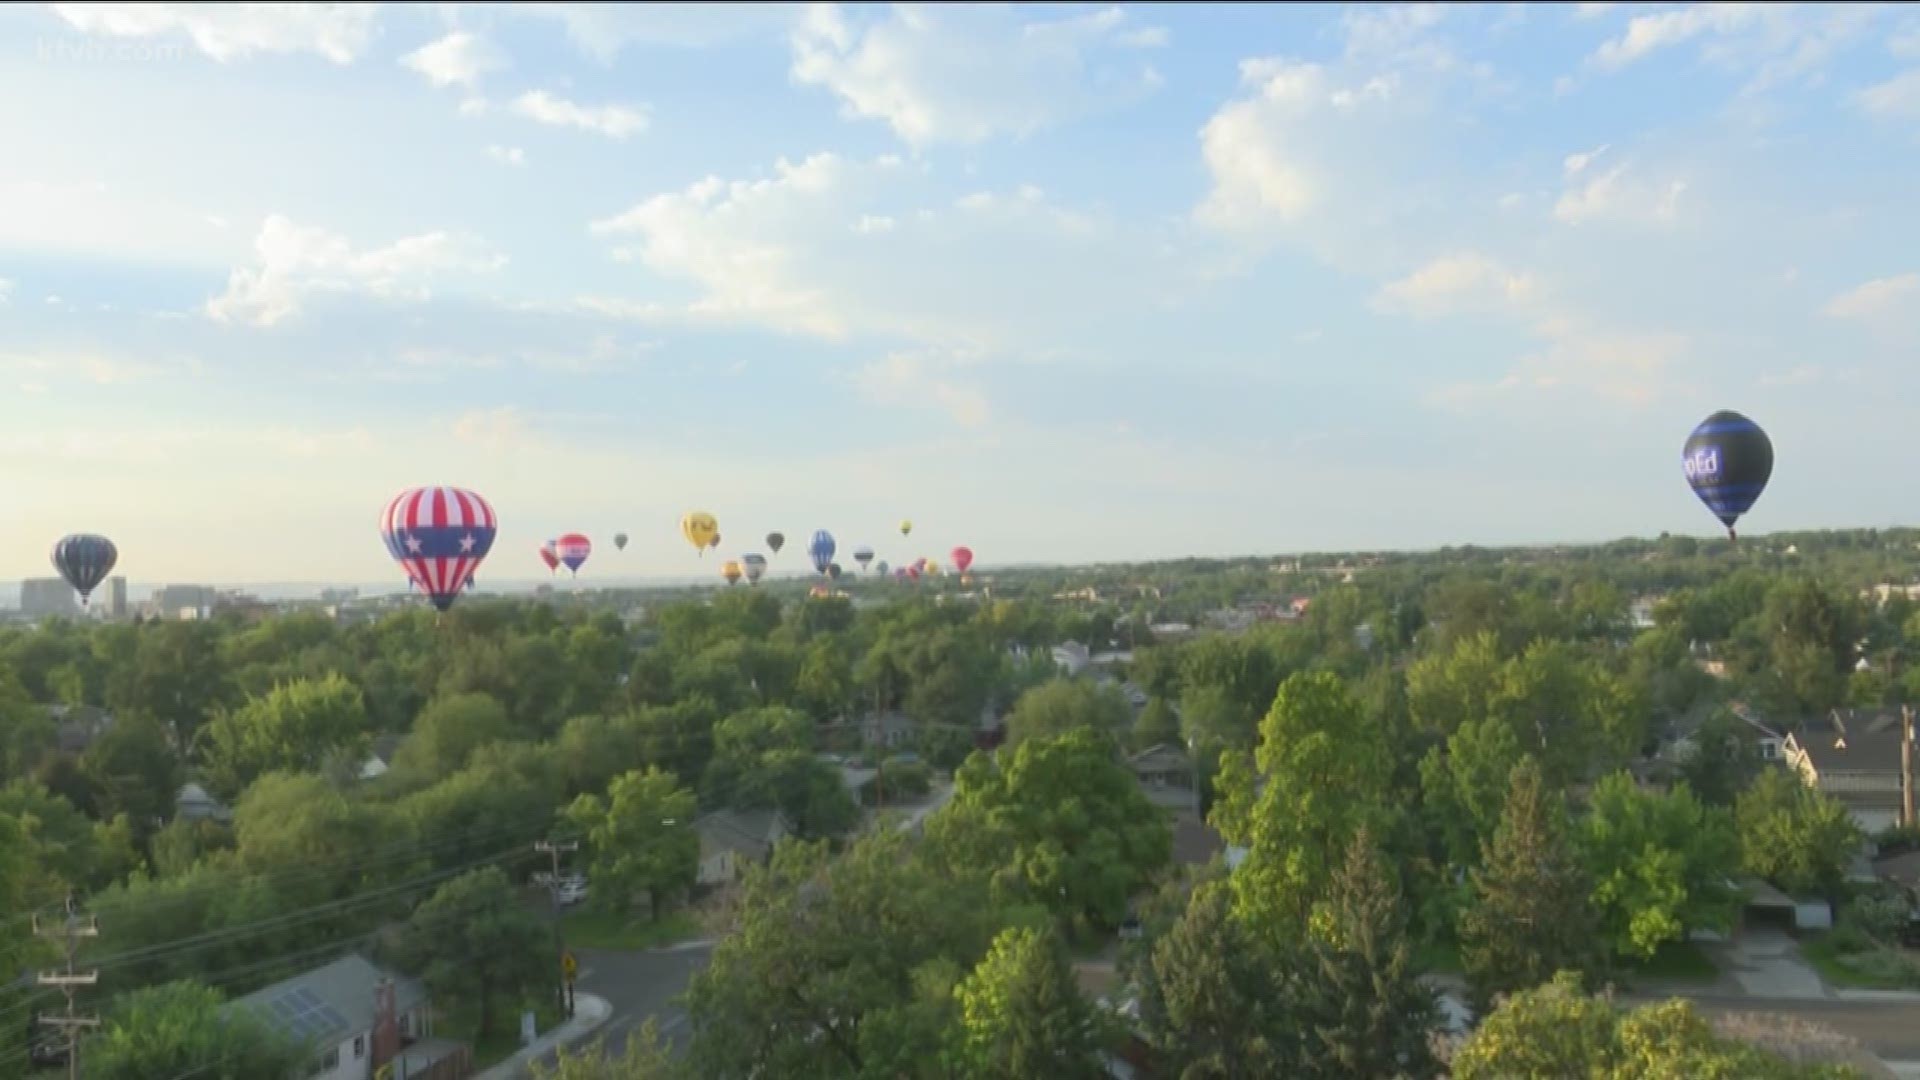 Joe Parris gives us a special look at Boise from above.